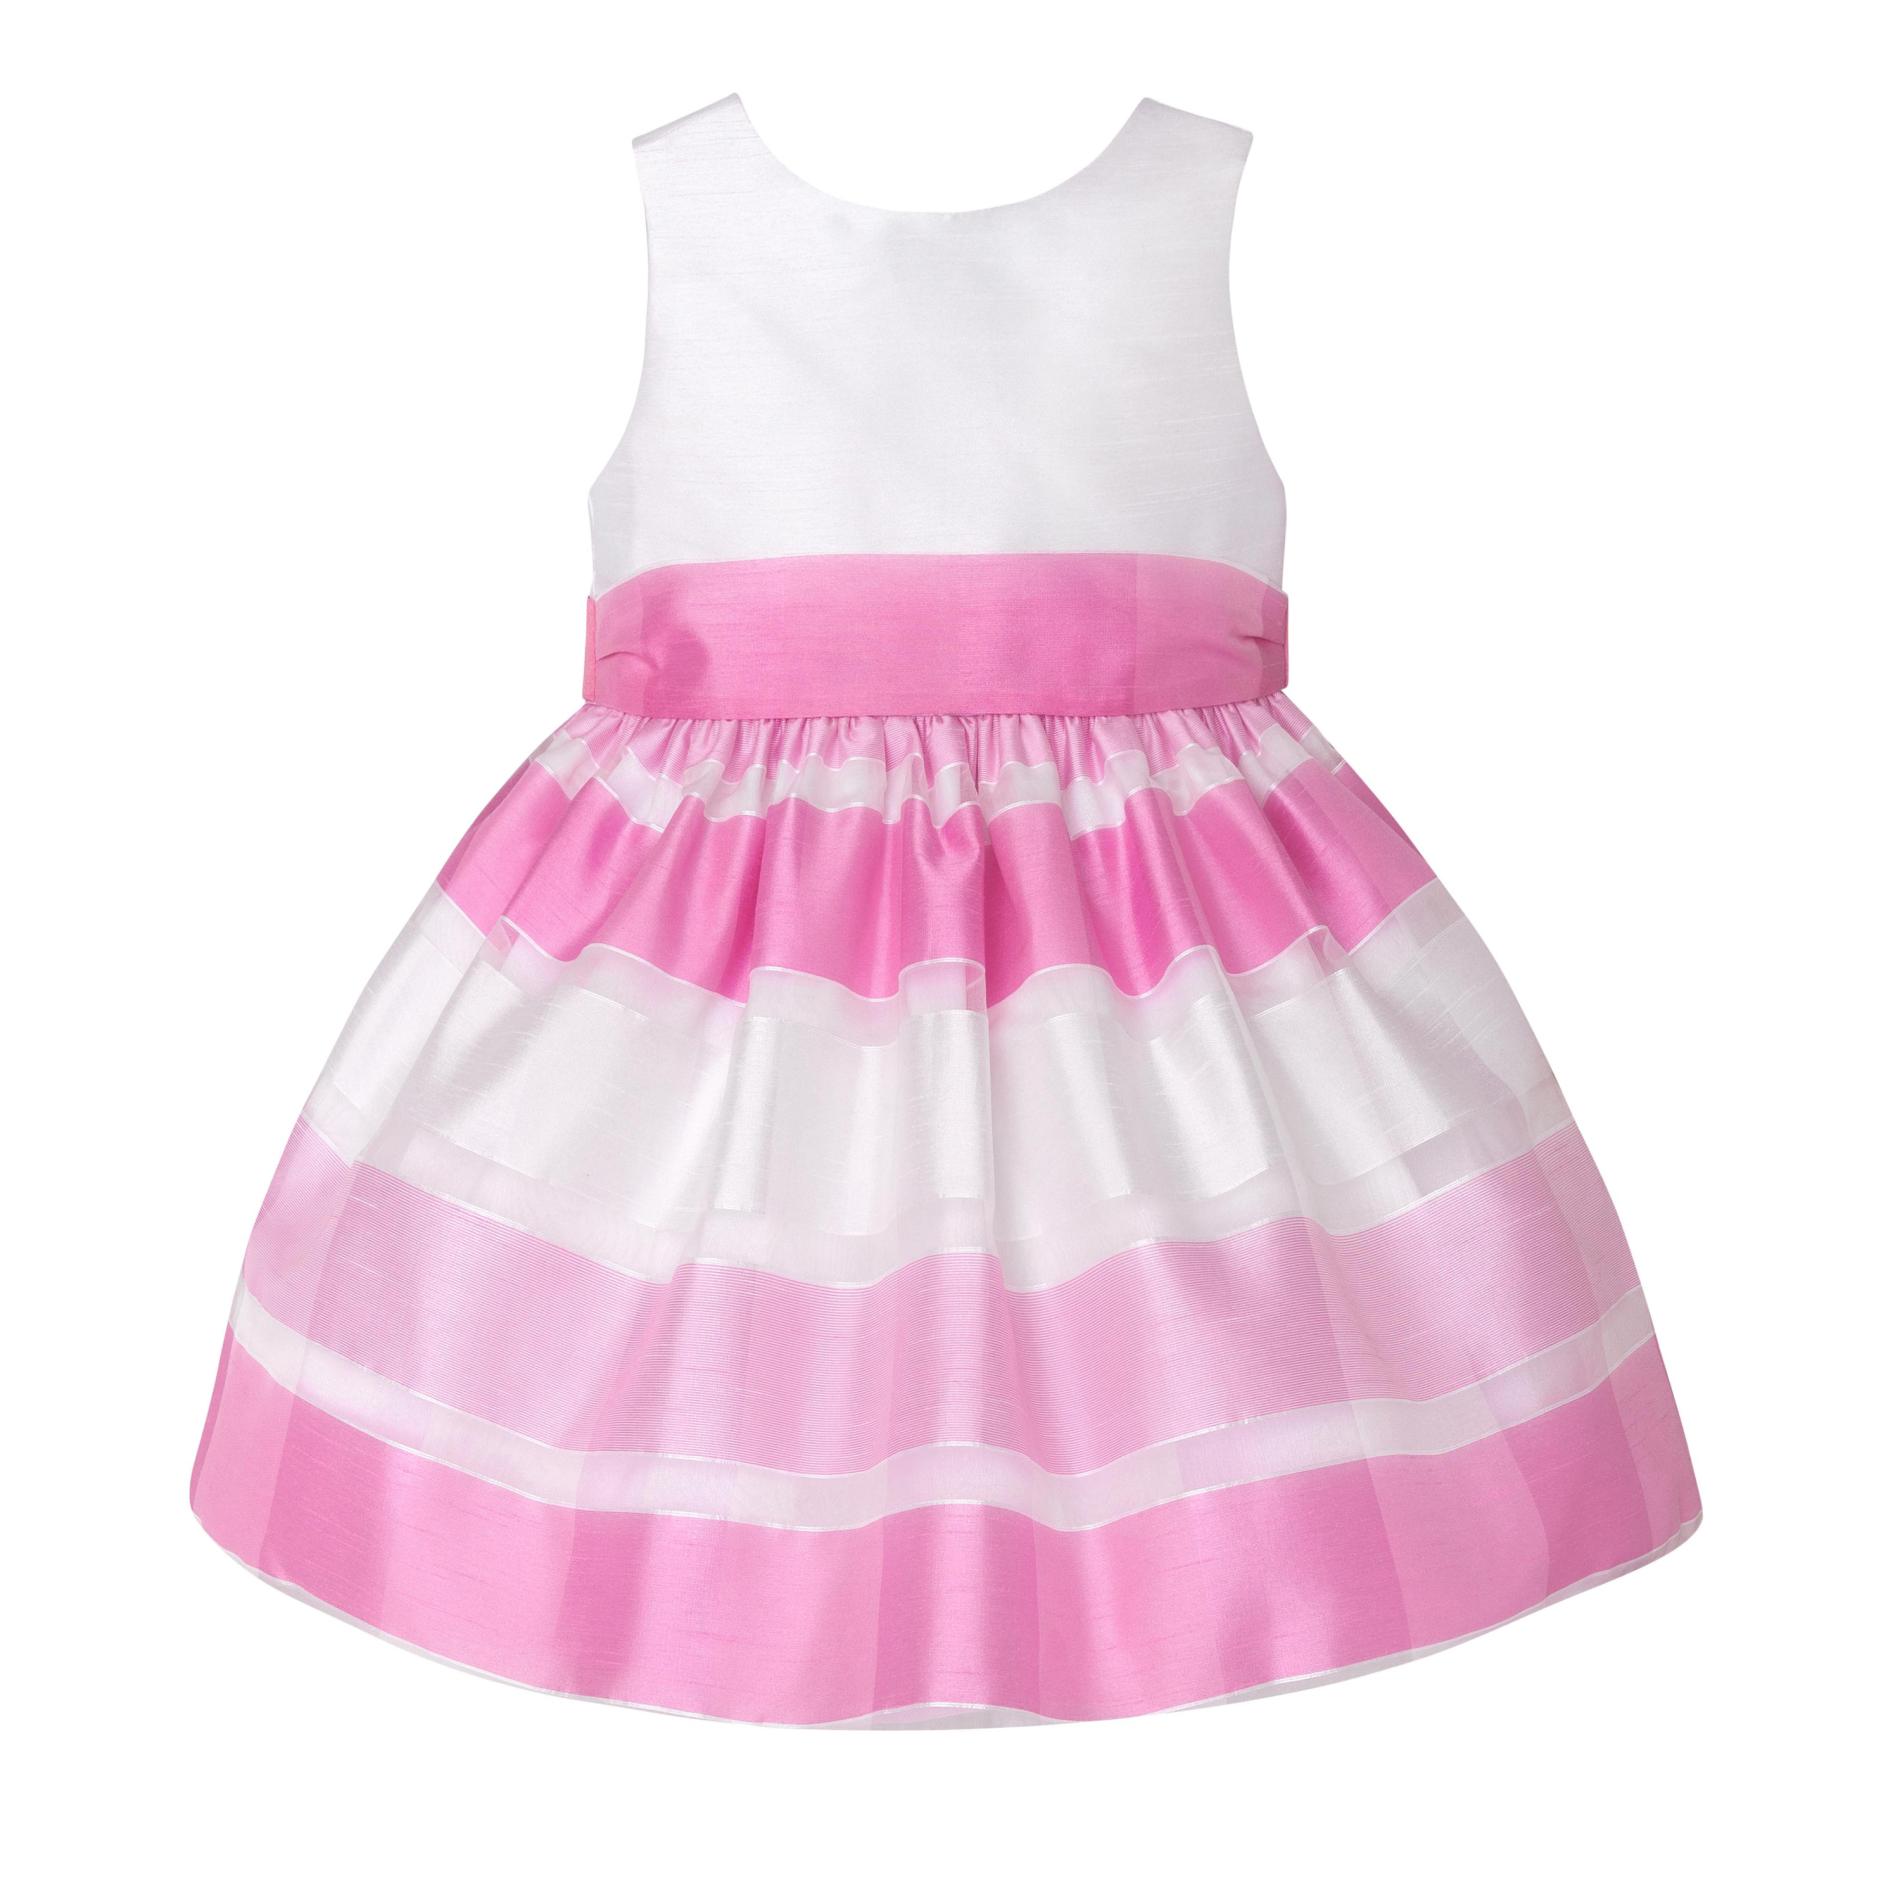 American Princess Infant & Toddler Girls Party Dress - Striped